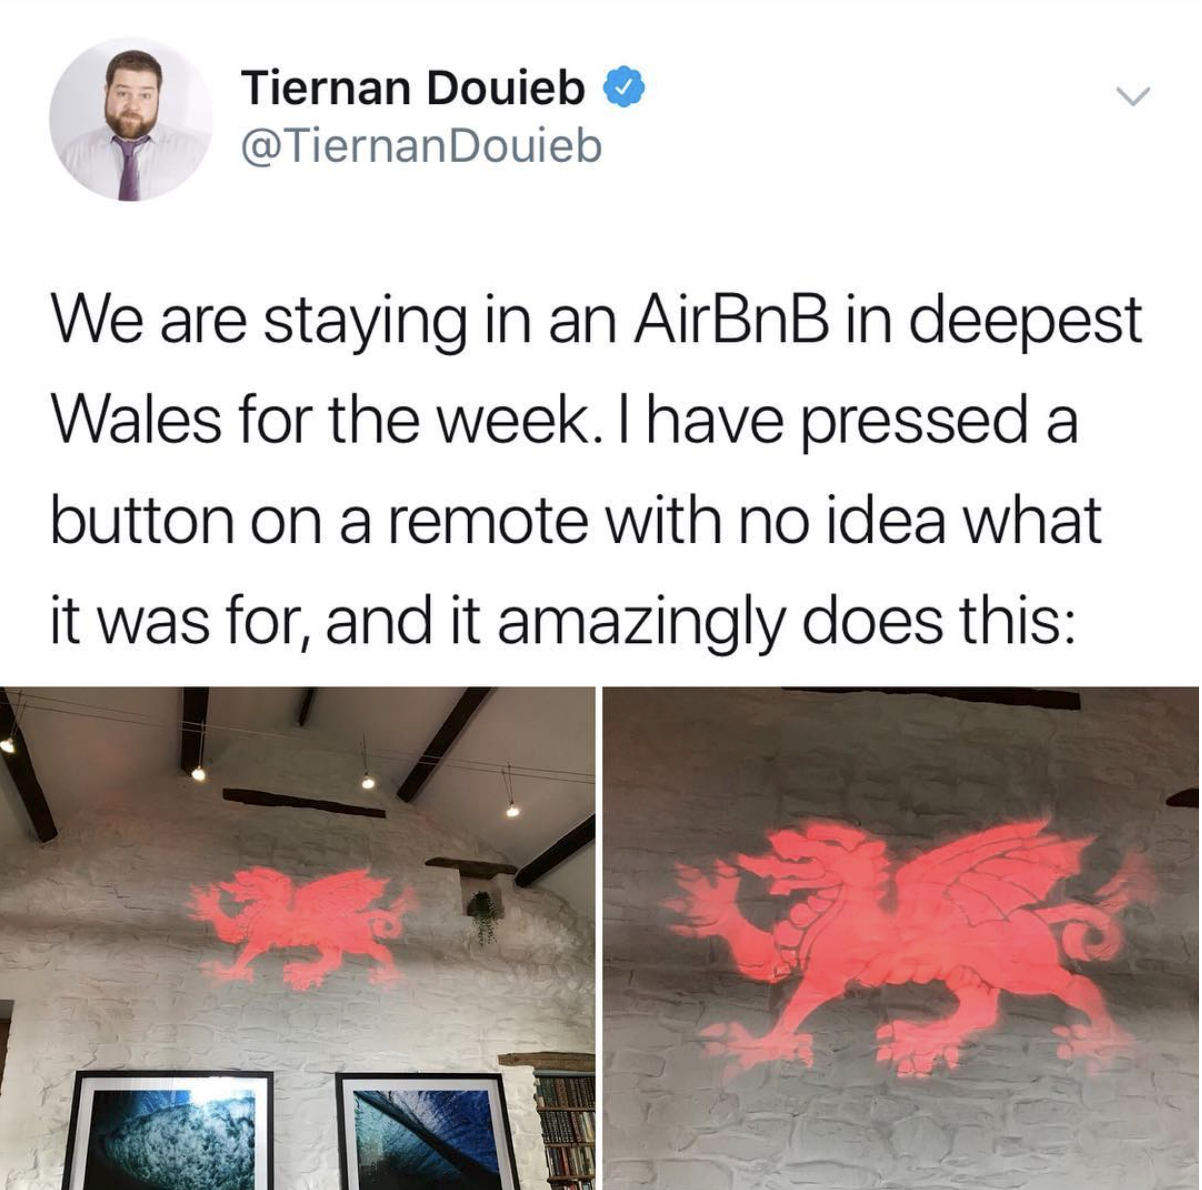 memes - funny airbnb memes - Tiernan Douieb Douieb We are staying in an AirBnB in deepest Wales for the week. I have pressed a button on a remote with no idea what it was for, and it amazingly does this